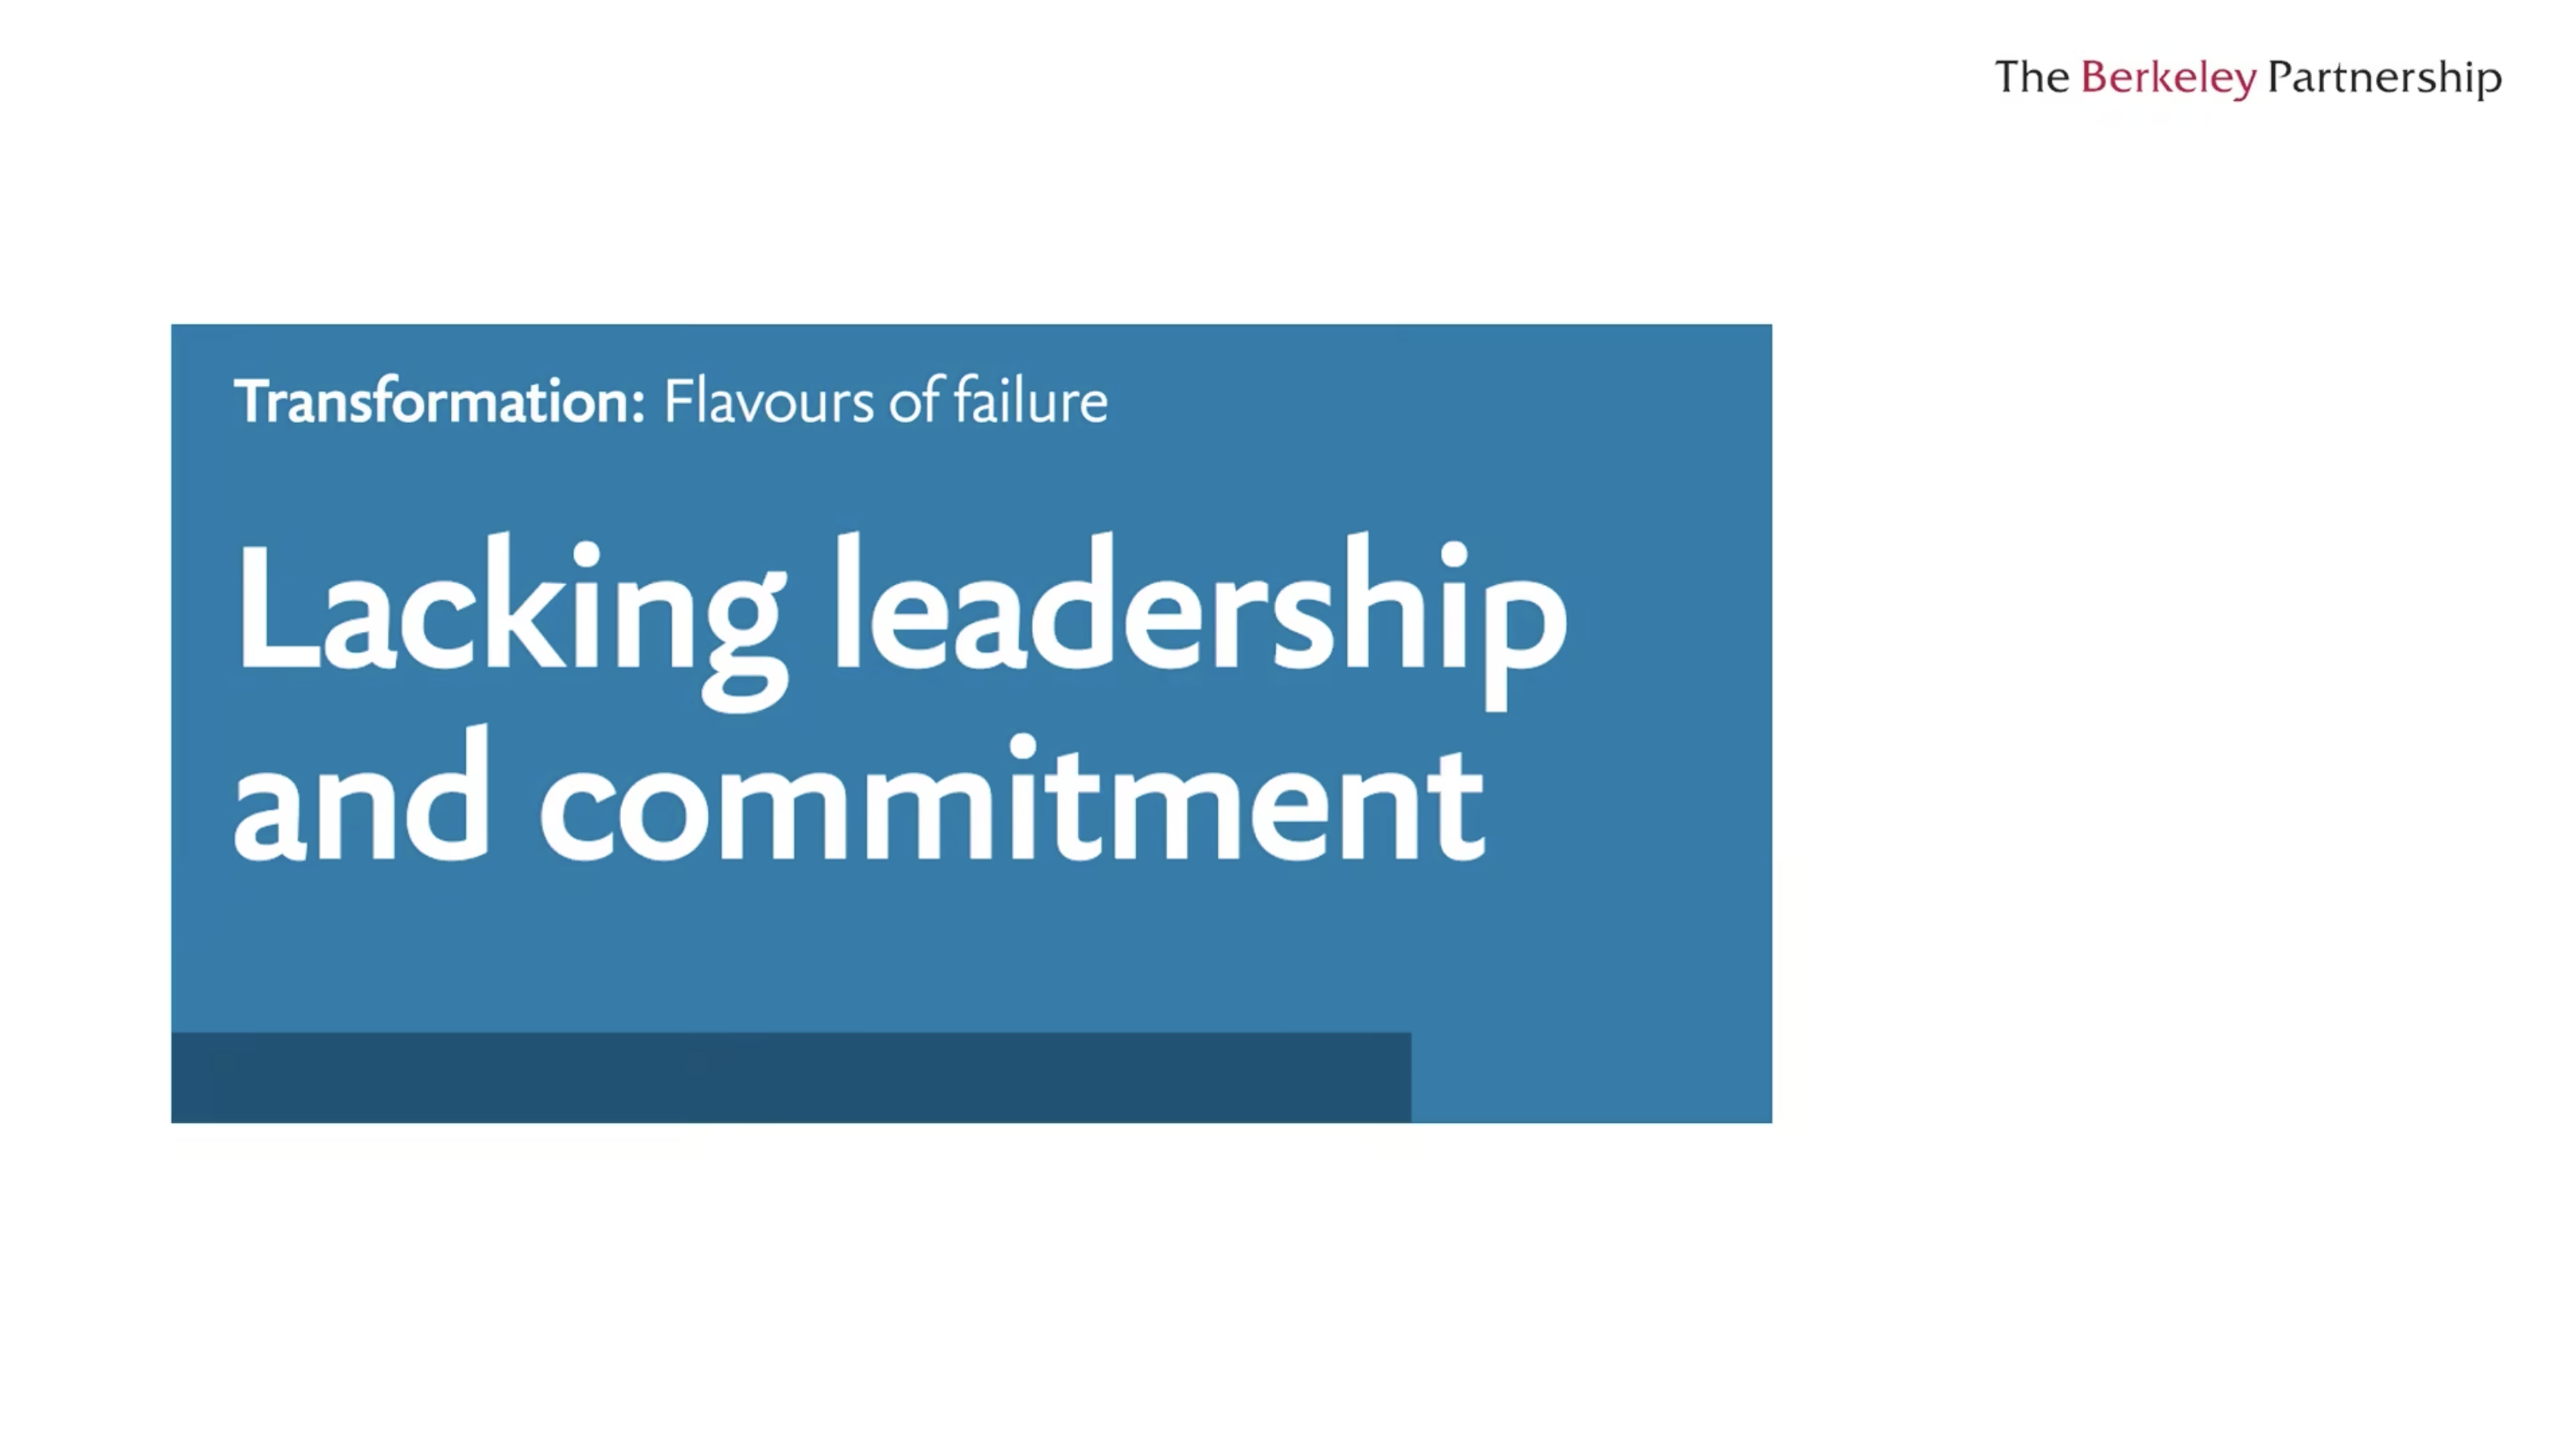 Flavours of failure: Lacking leadership and commitment